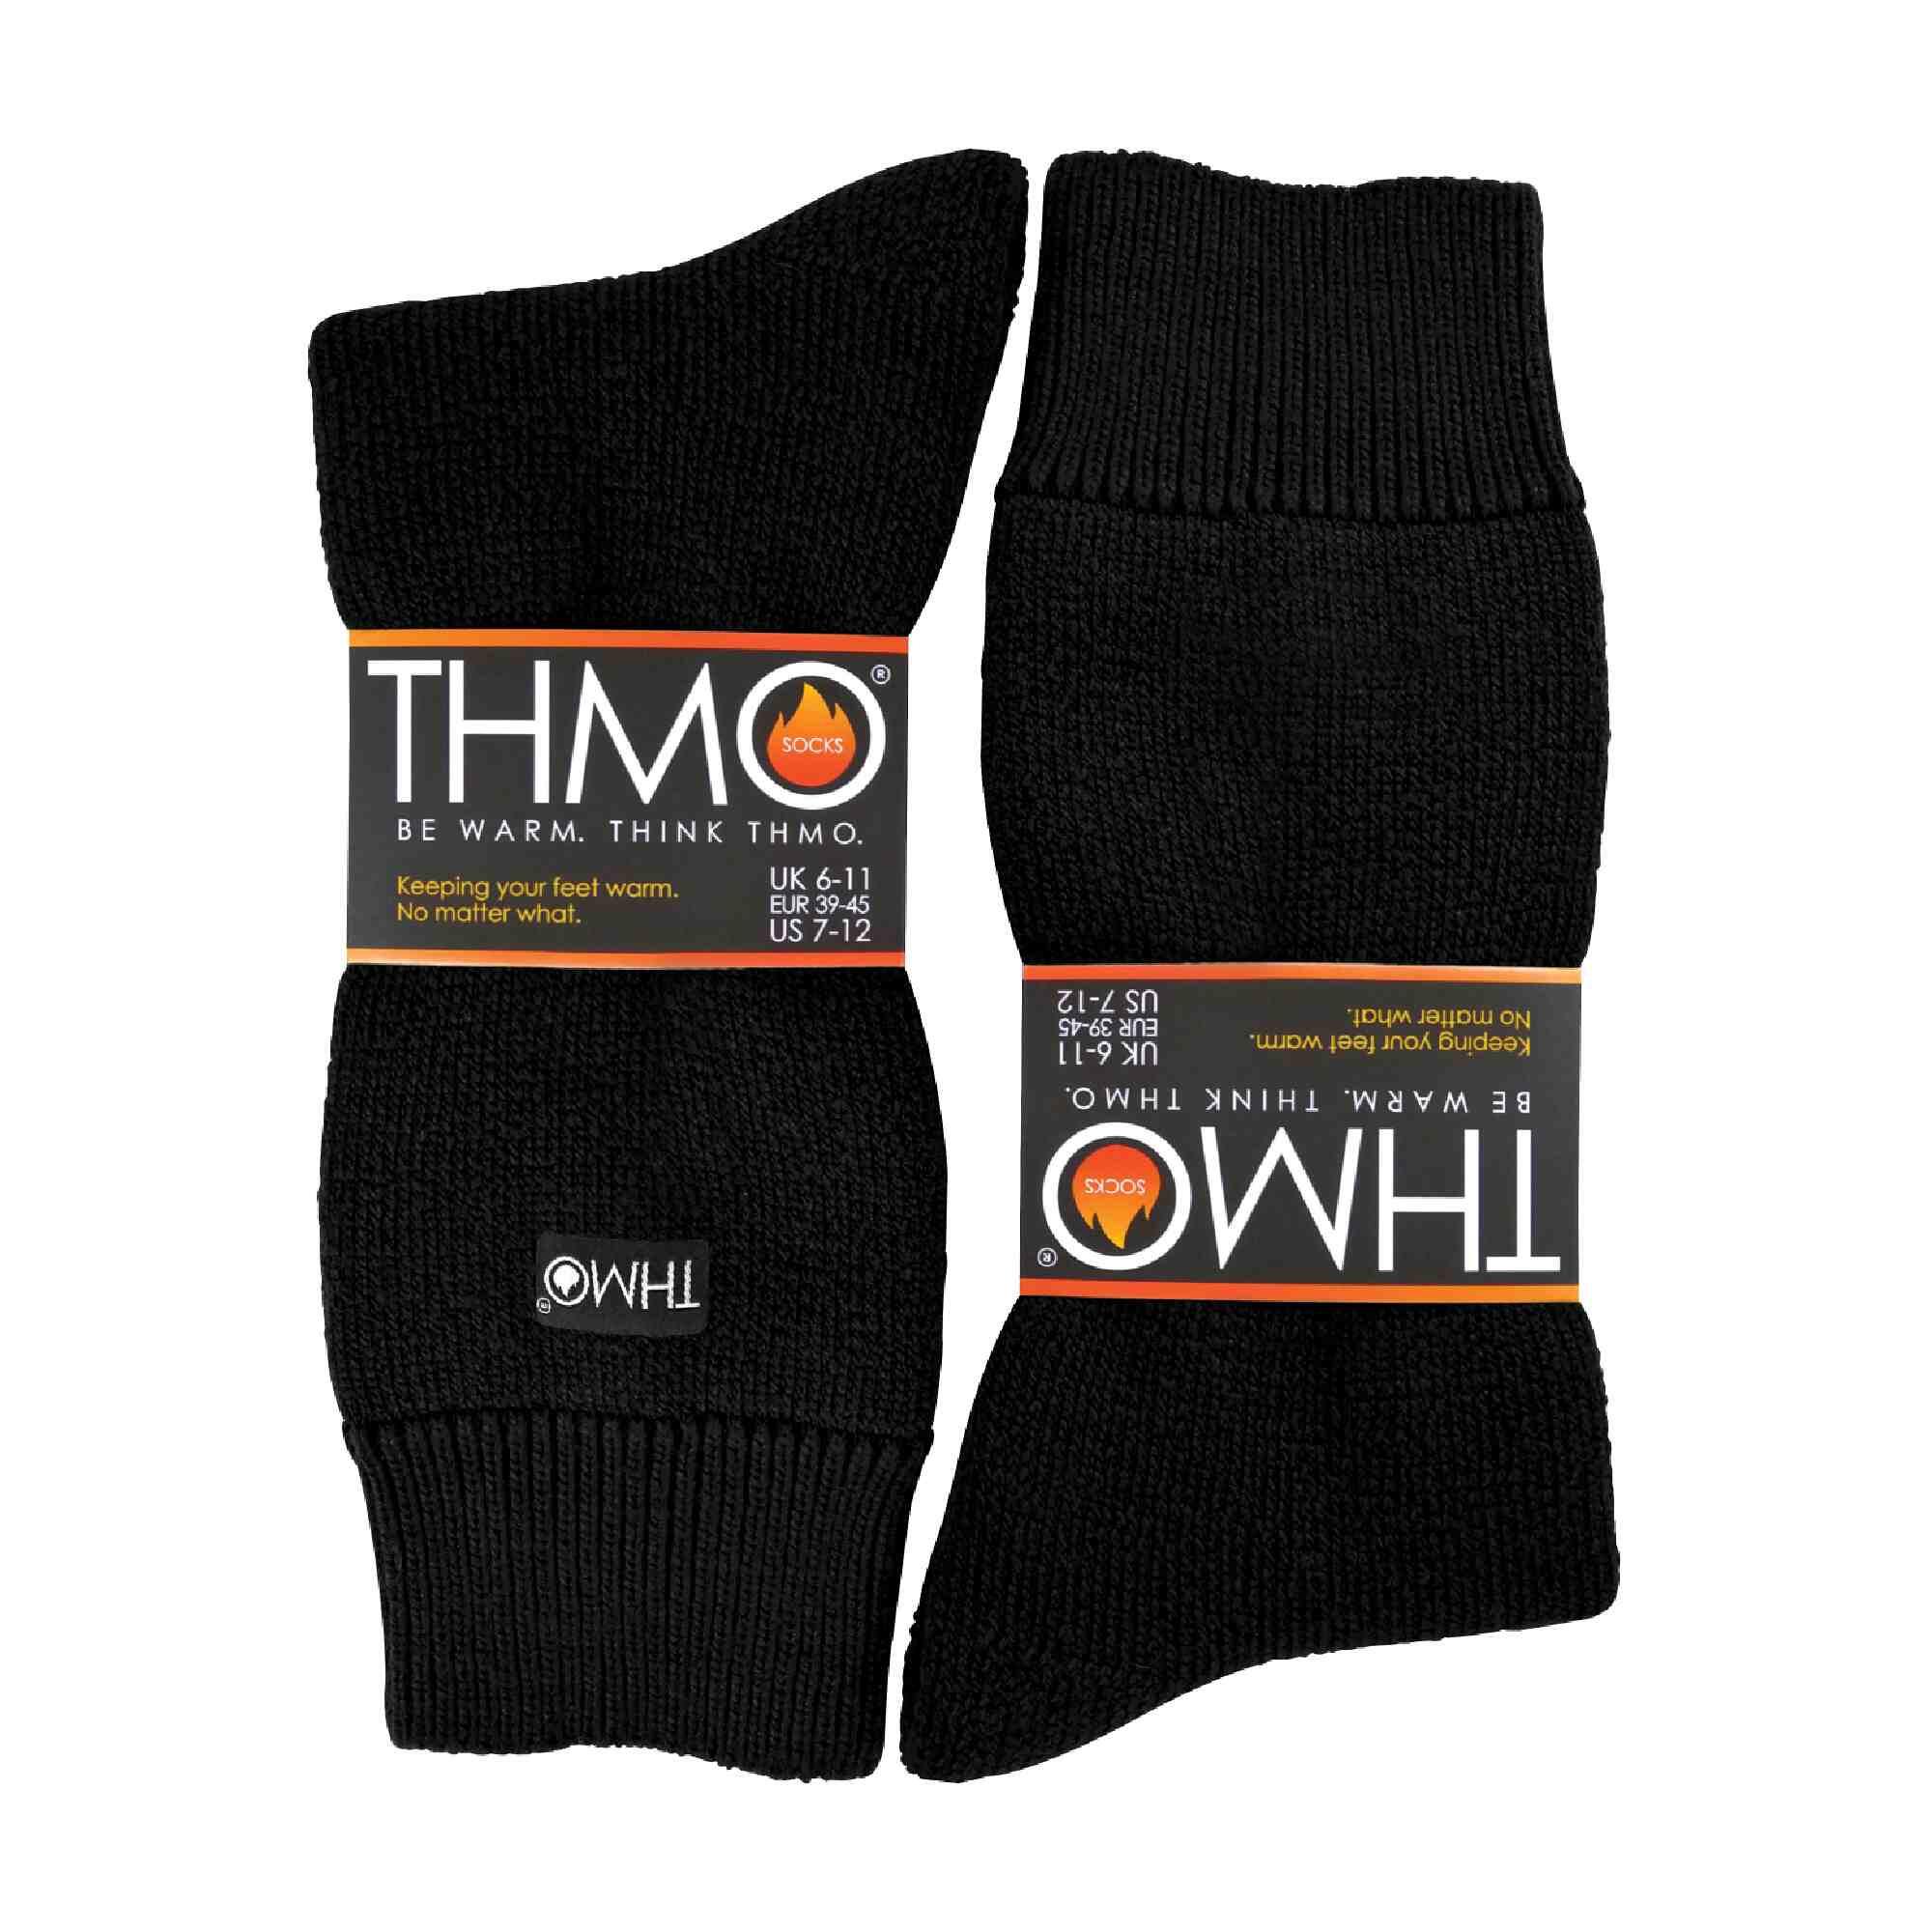 1 Pair Mens Thick Fleece Lined Warm Thermal Socks for Winter 2/7